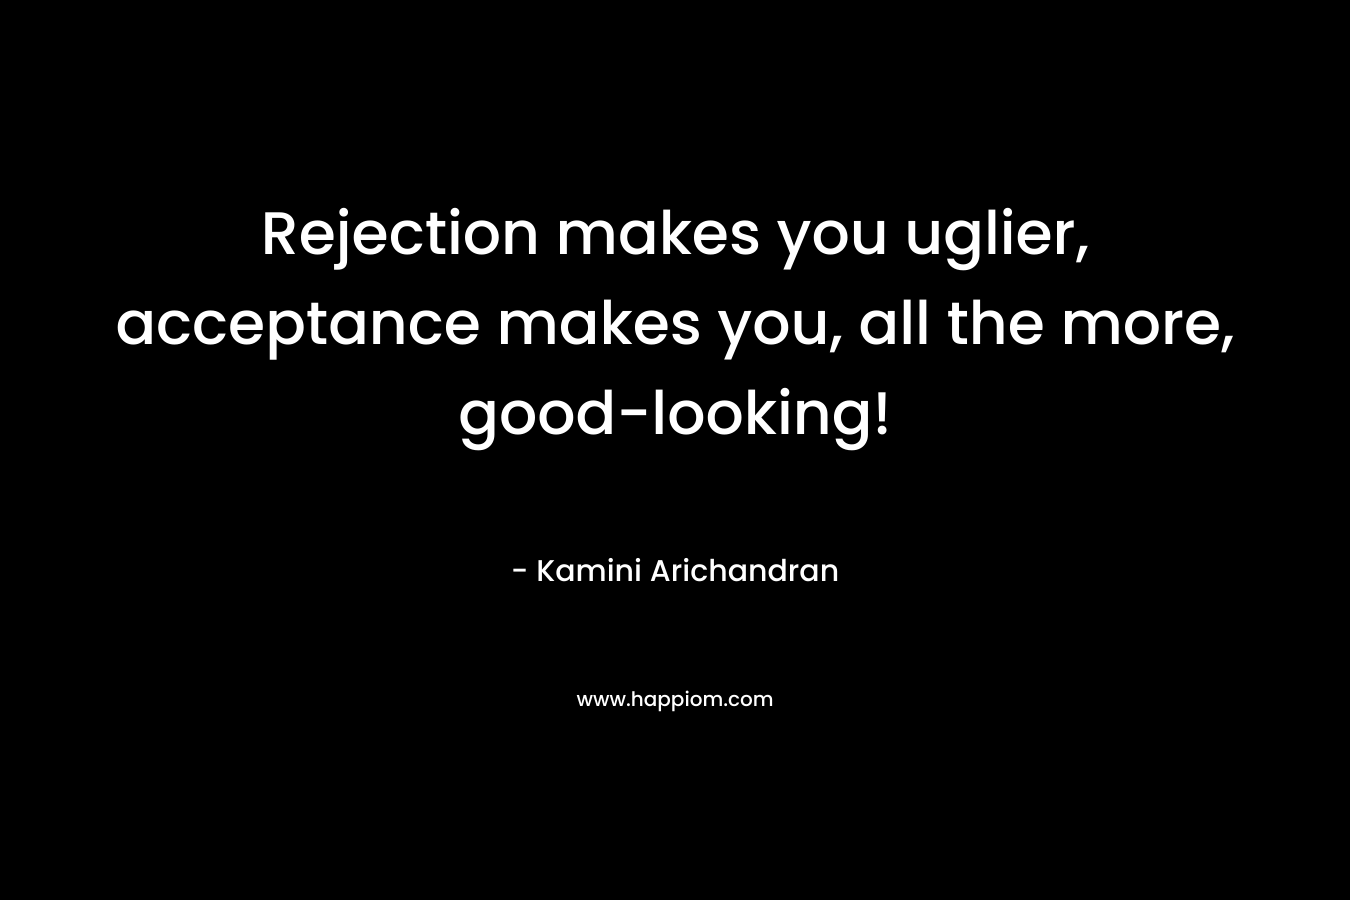 Rejection makes you uglier, acceptance makes you, all the more, good-looking! – Kamini Arichandran